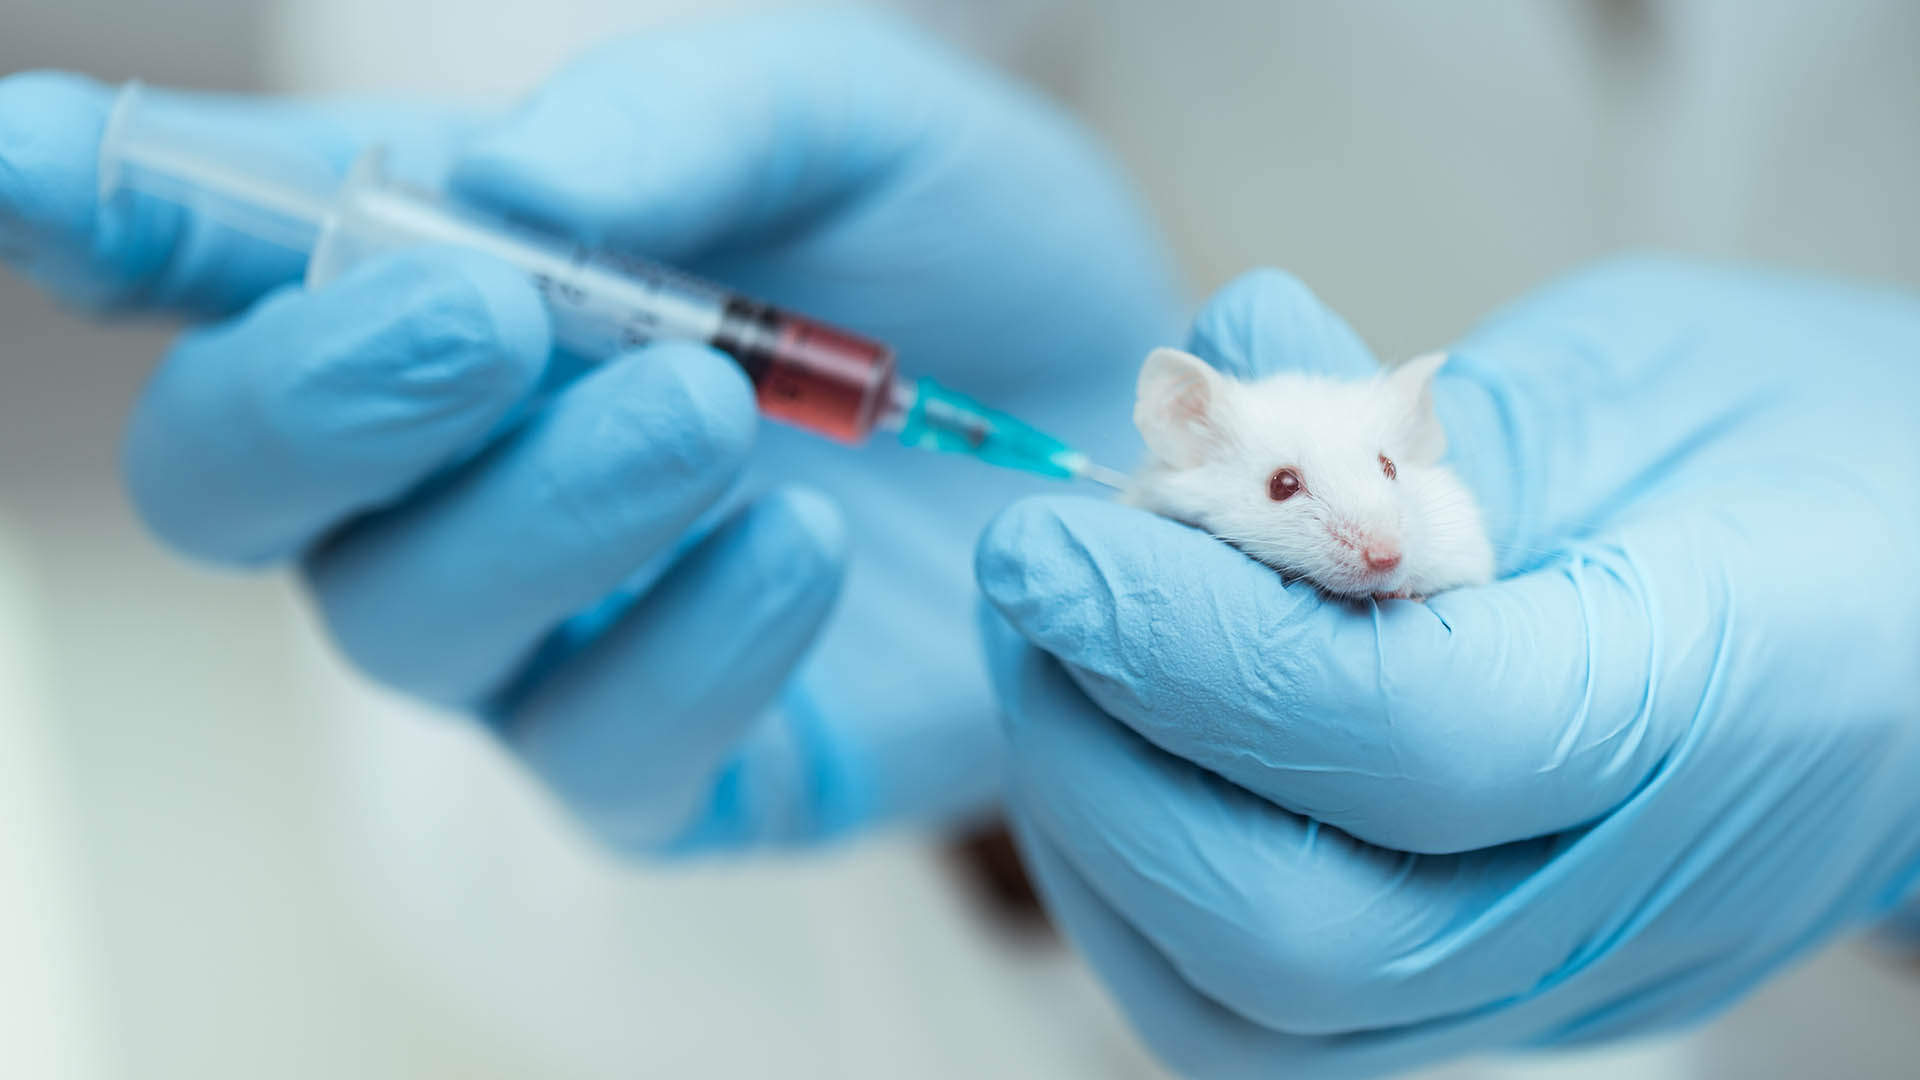 For the study, the researchers grafted pieces of a human breast cancer tumor onto mice and trained 35 ants to recognize the urine of tumor-bearing rodents (Getty).